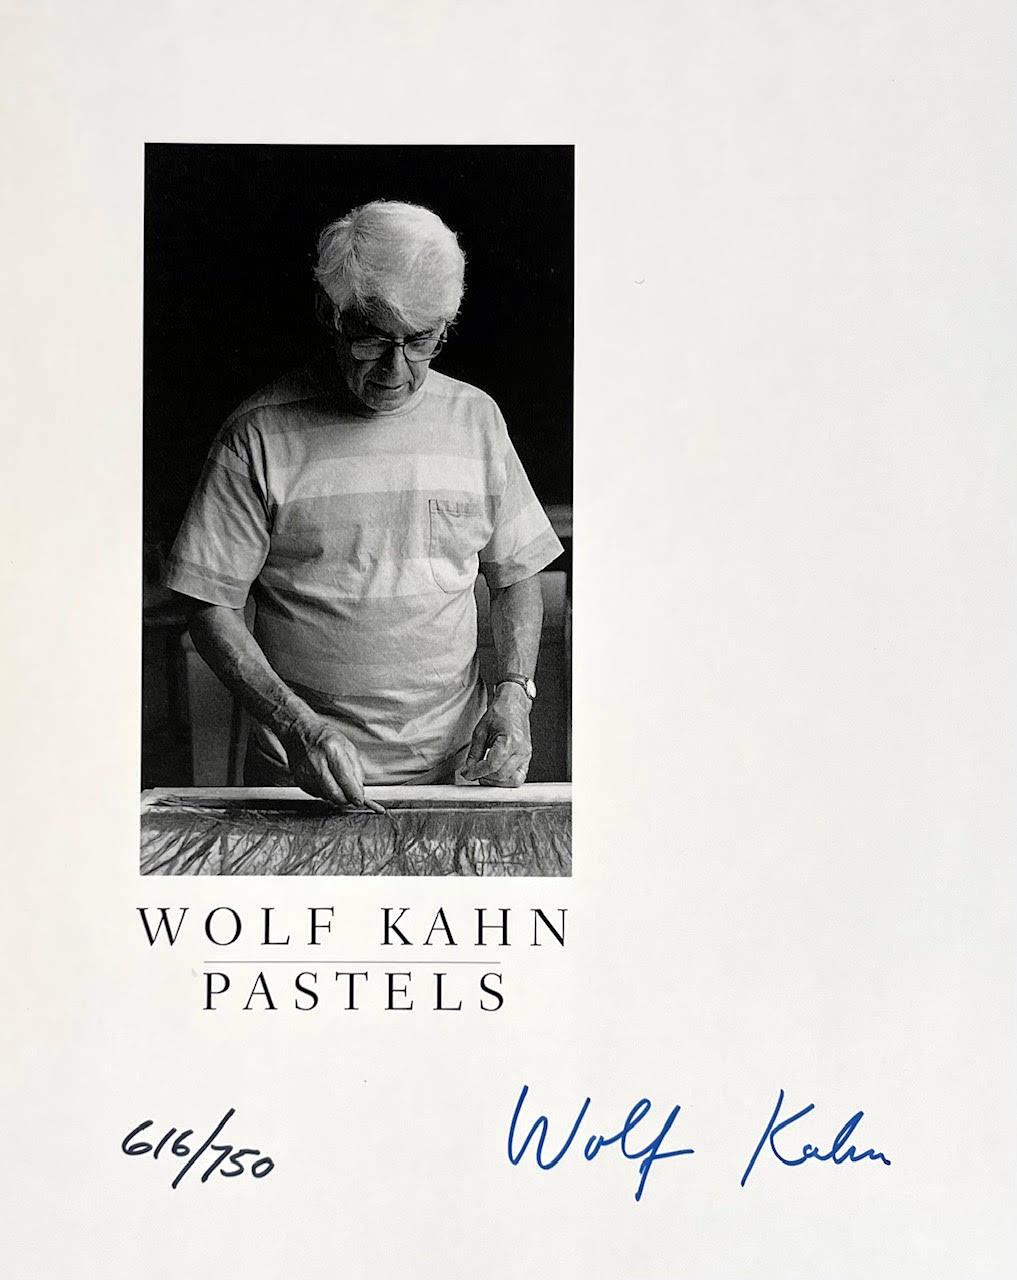 Wolf Kahn Pastels (monograph with slip case, hand signed and numbered), 2000
Hardback monograph with slipcase and dust jacket (hand signed and numbered by Wolf Kahn)
Hand signed and numbered 616/750 by Wolf Kahn on the half title page
10 × 11 3/4